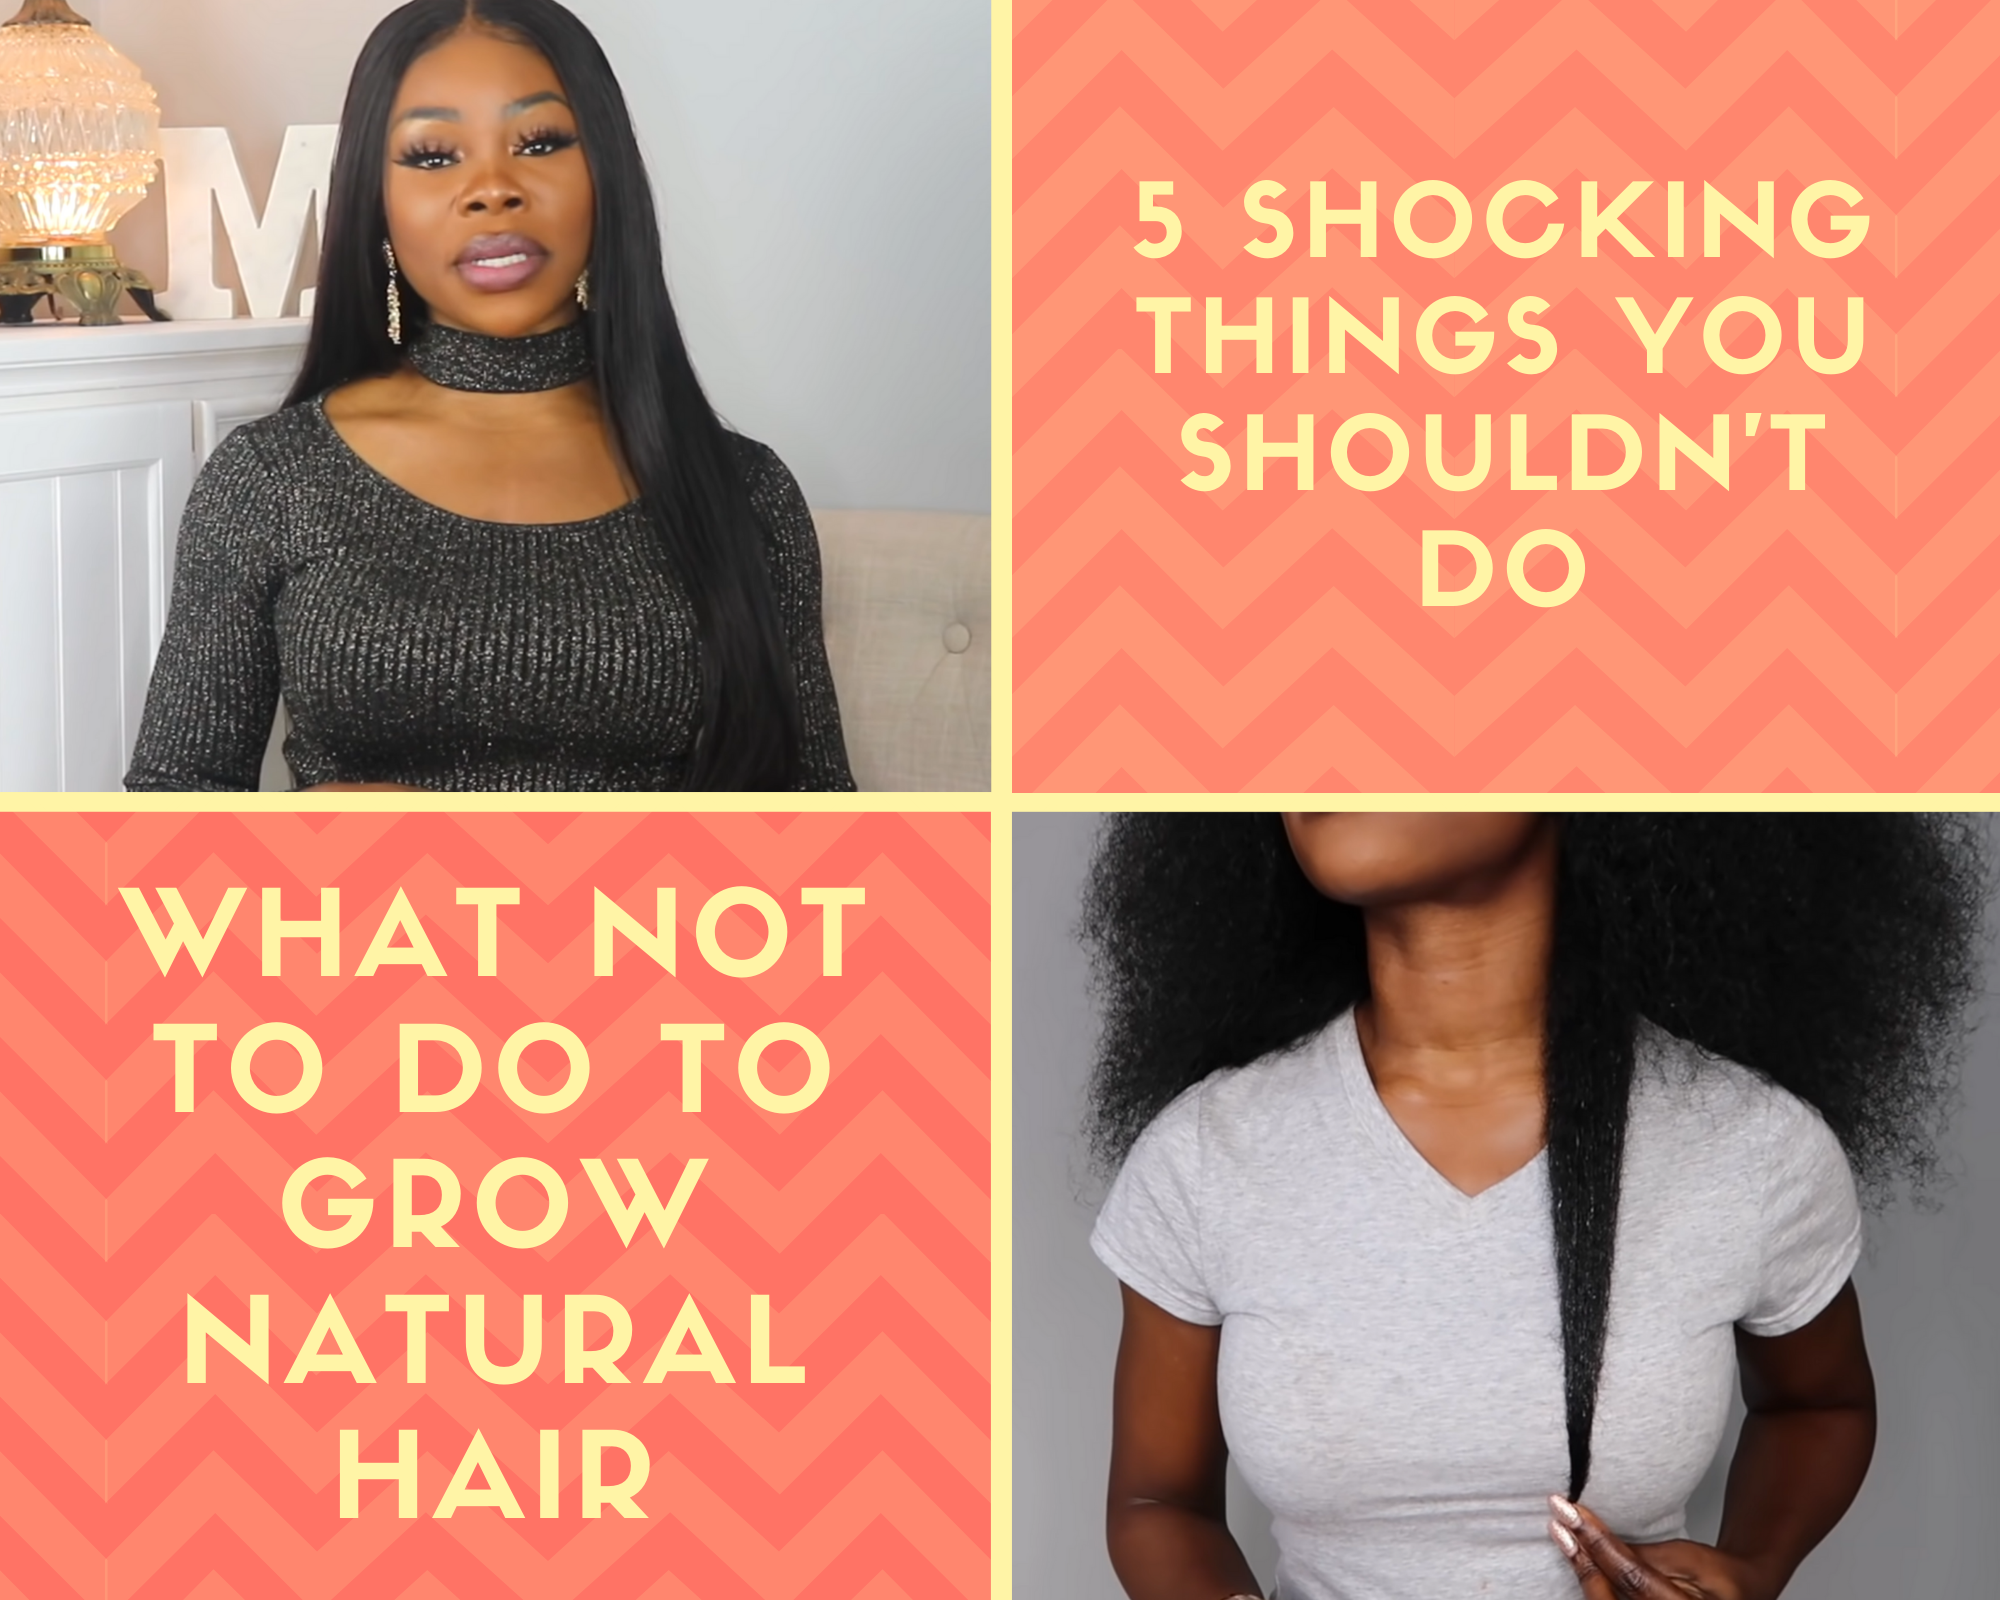 16 Ways to Make Hair Grow Faster, According to Experts